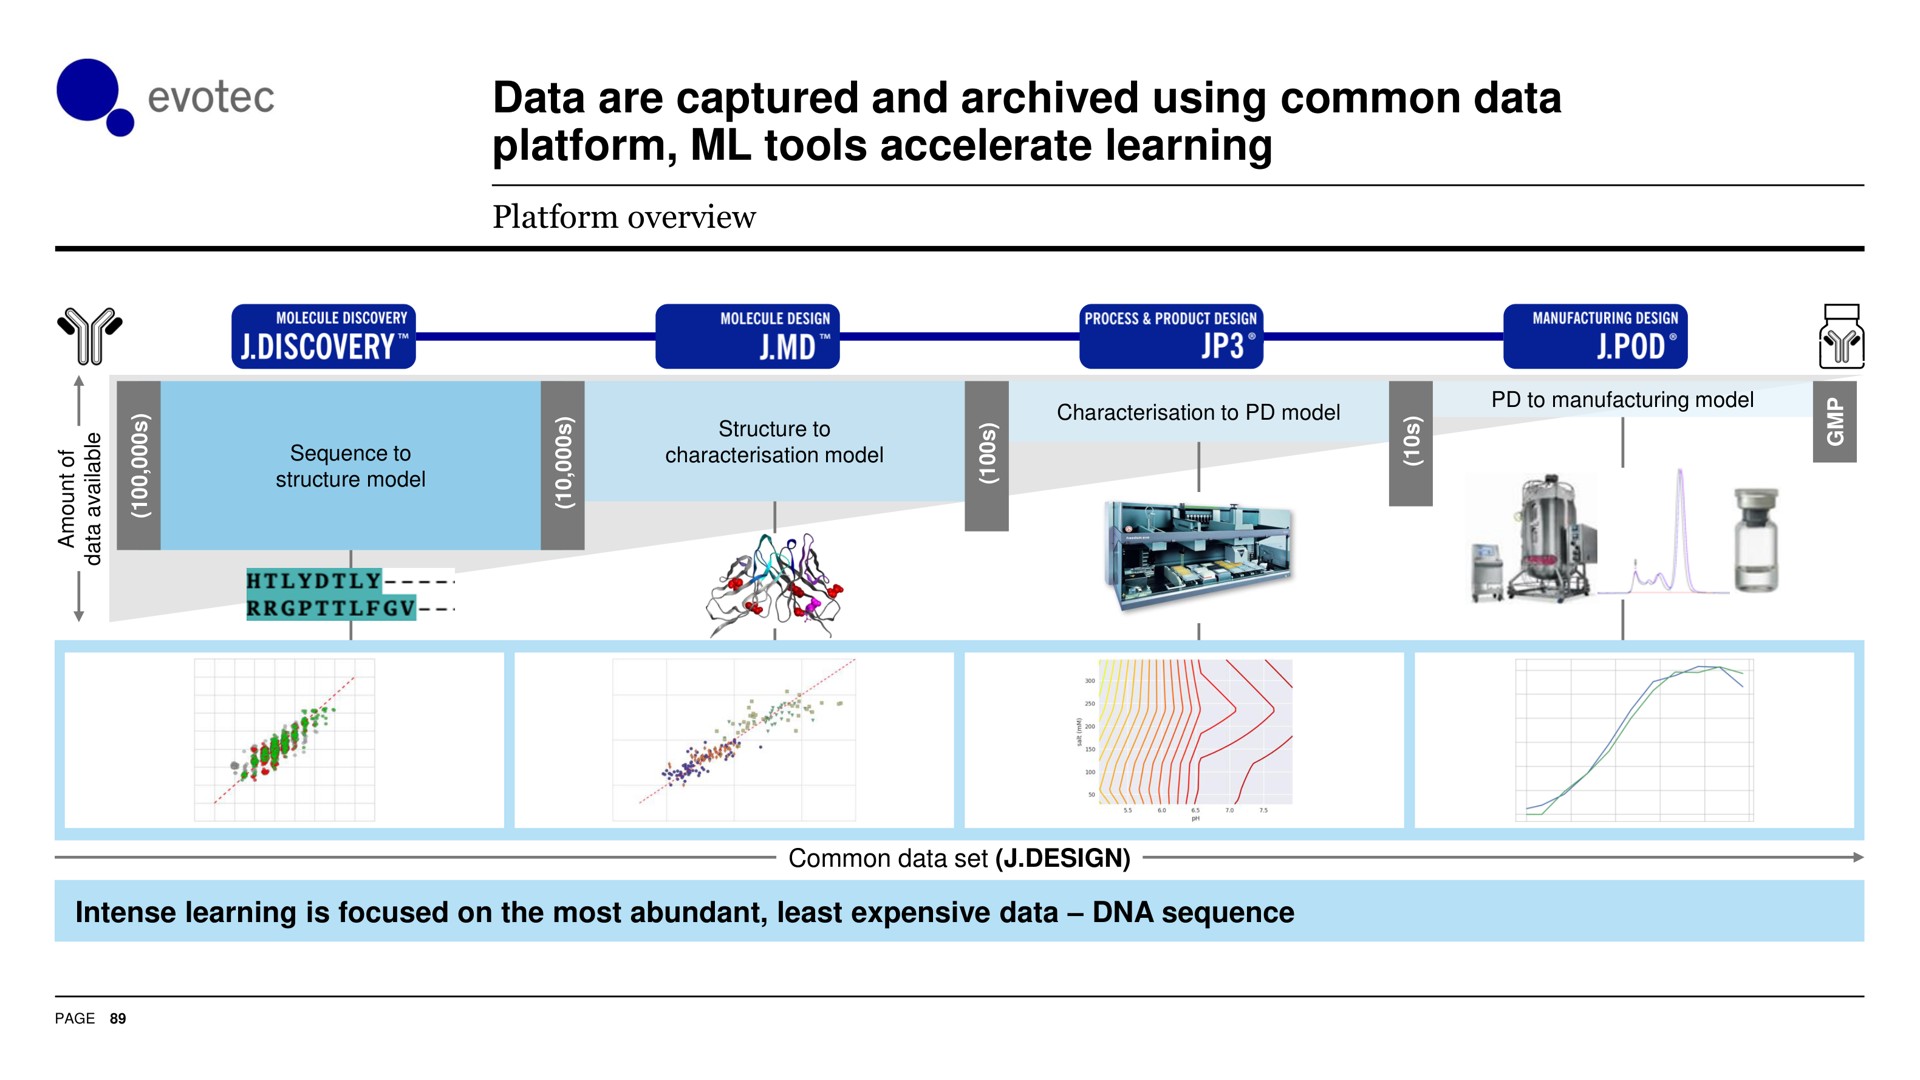 data are captured and archived using common data platform tools accelerate learning | Evotec